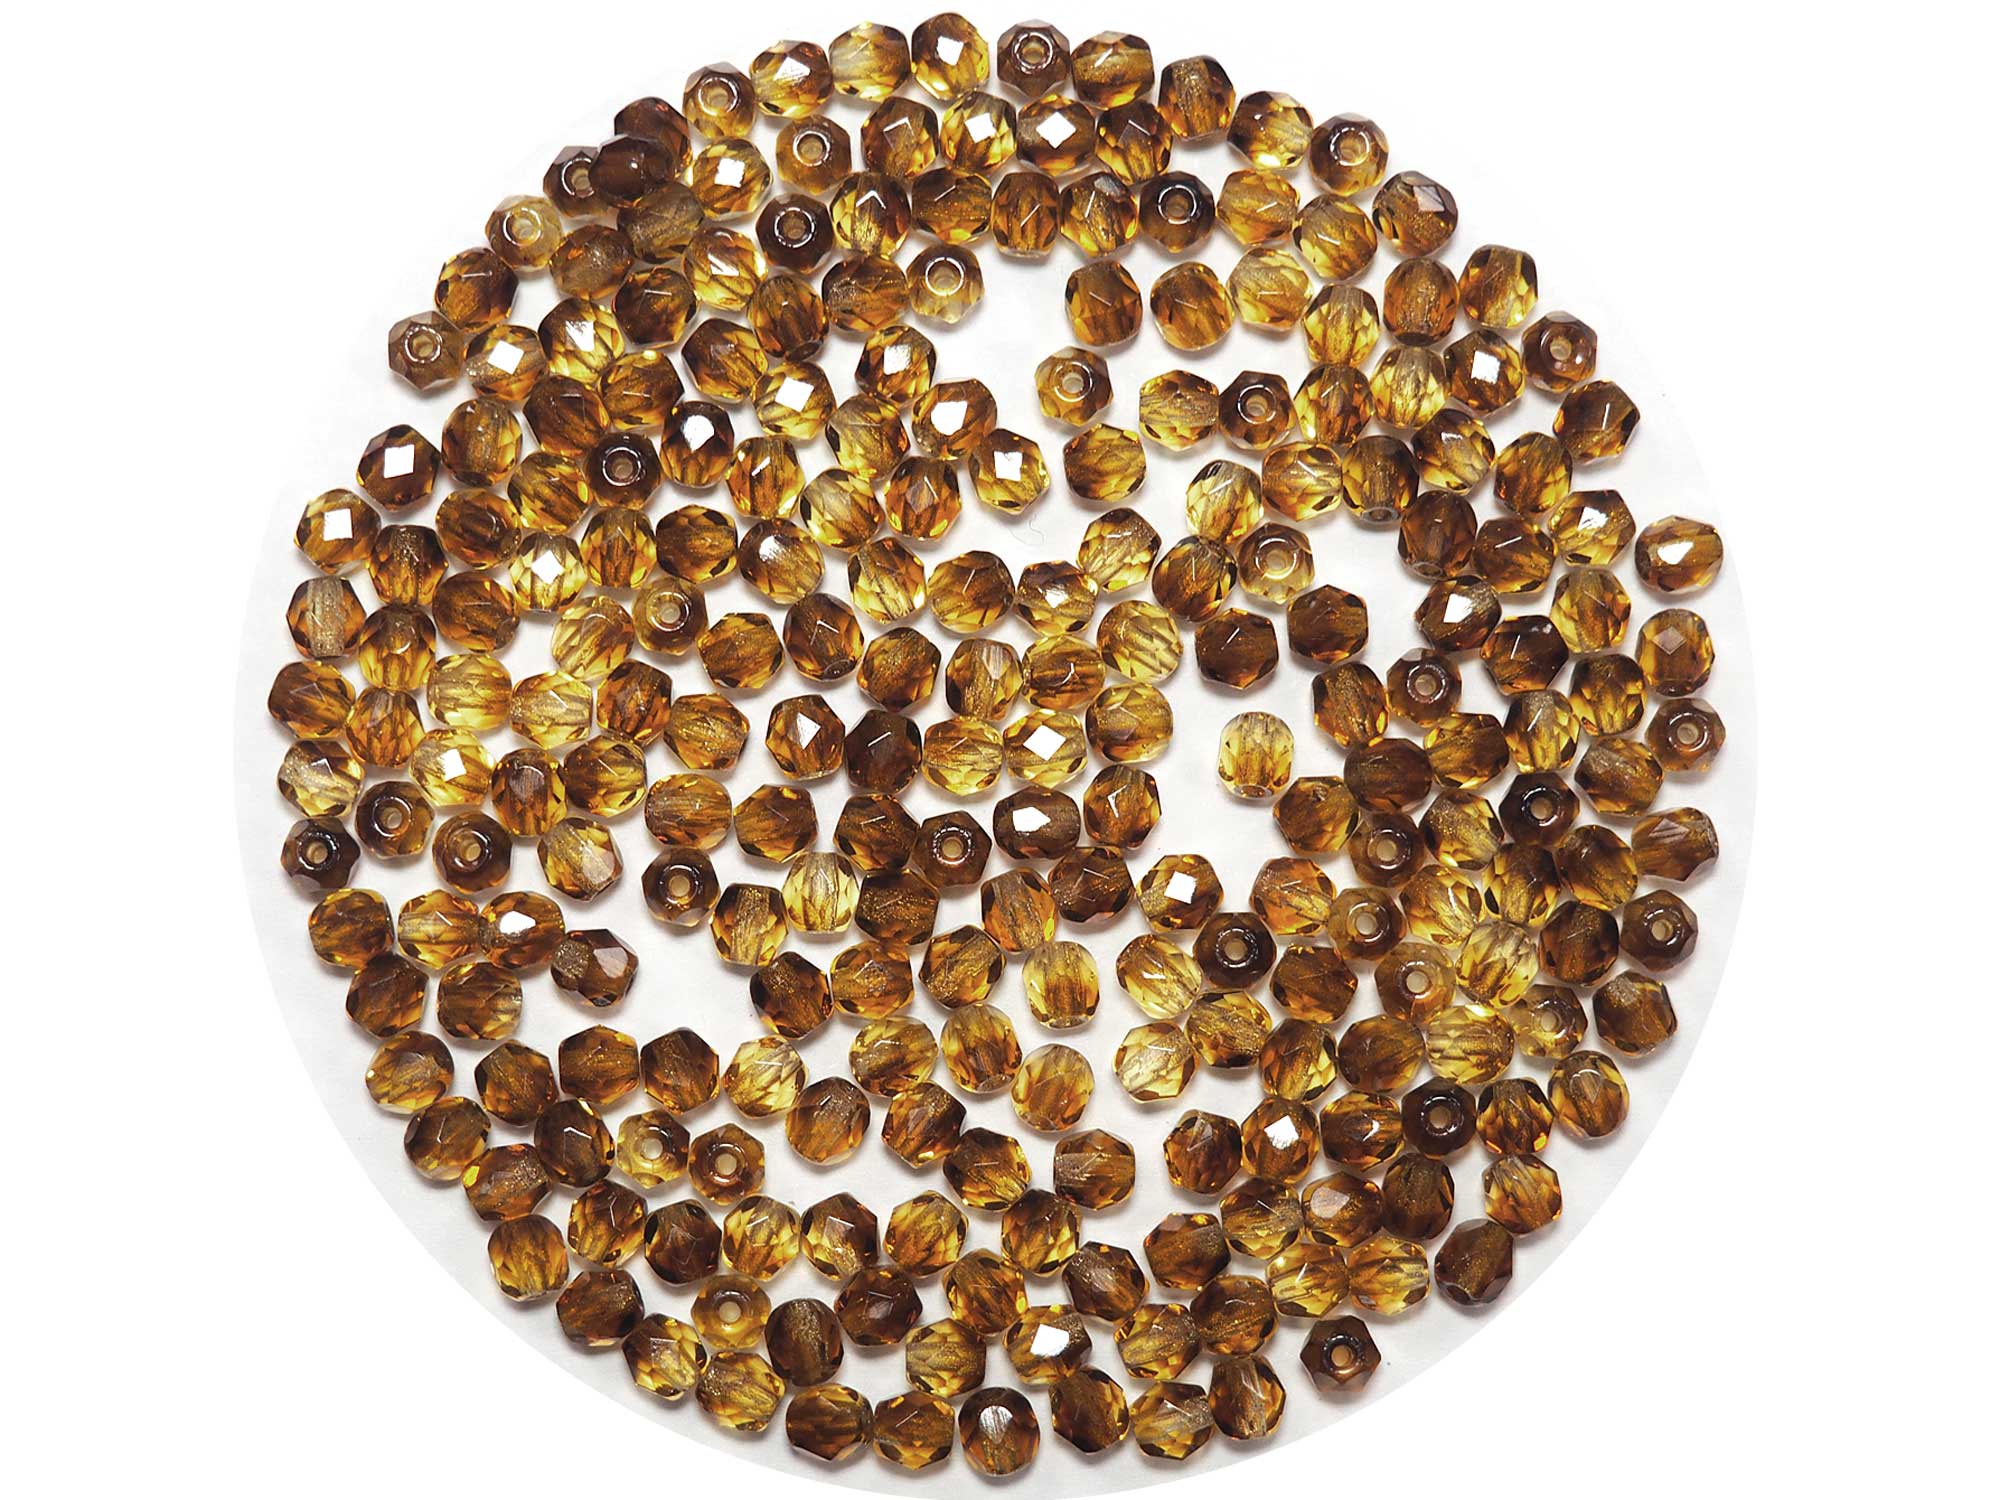 Filemot, Brown and Yellow 2-tone combination, Czech Fire Polished Round Faceted Glass Beads, 4mm 100pcs, P463